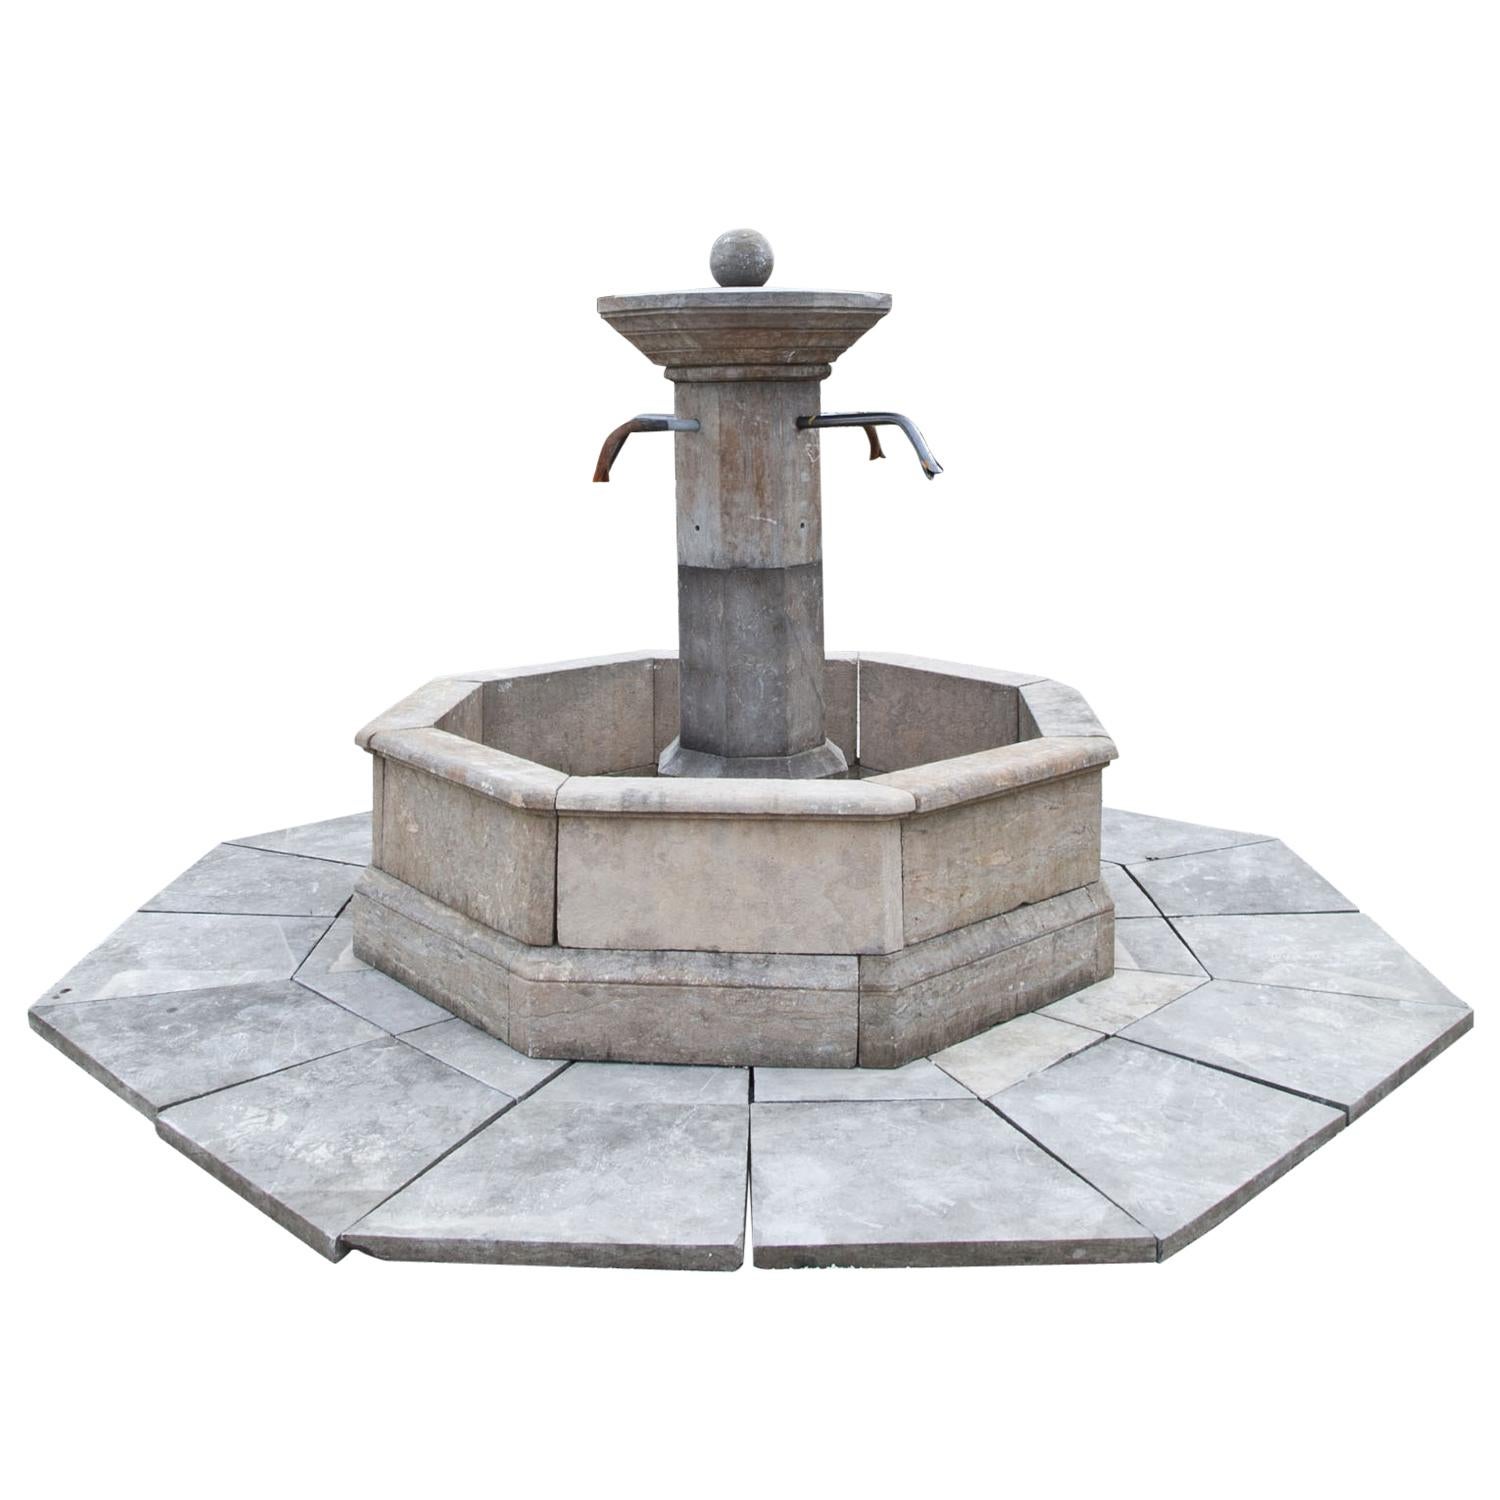 Courtyard Fountain with Baseplate, 21st Century